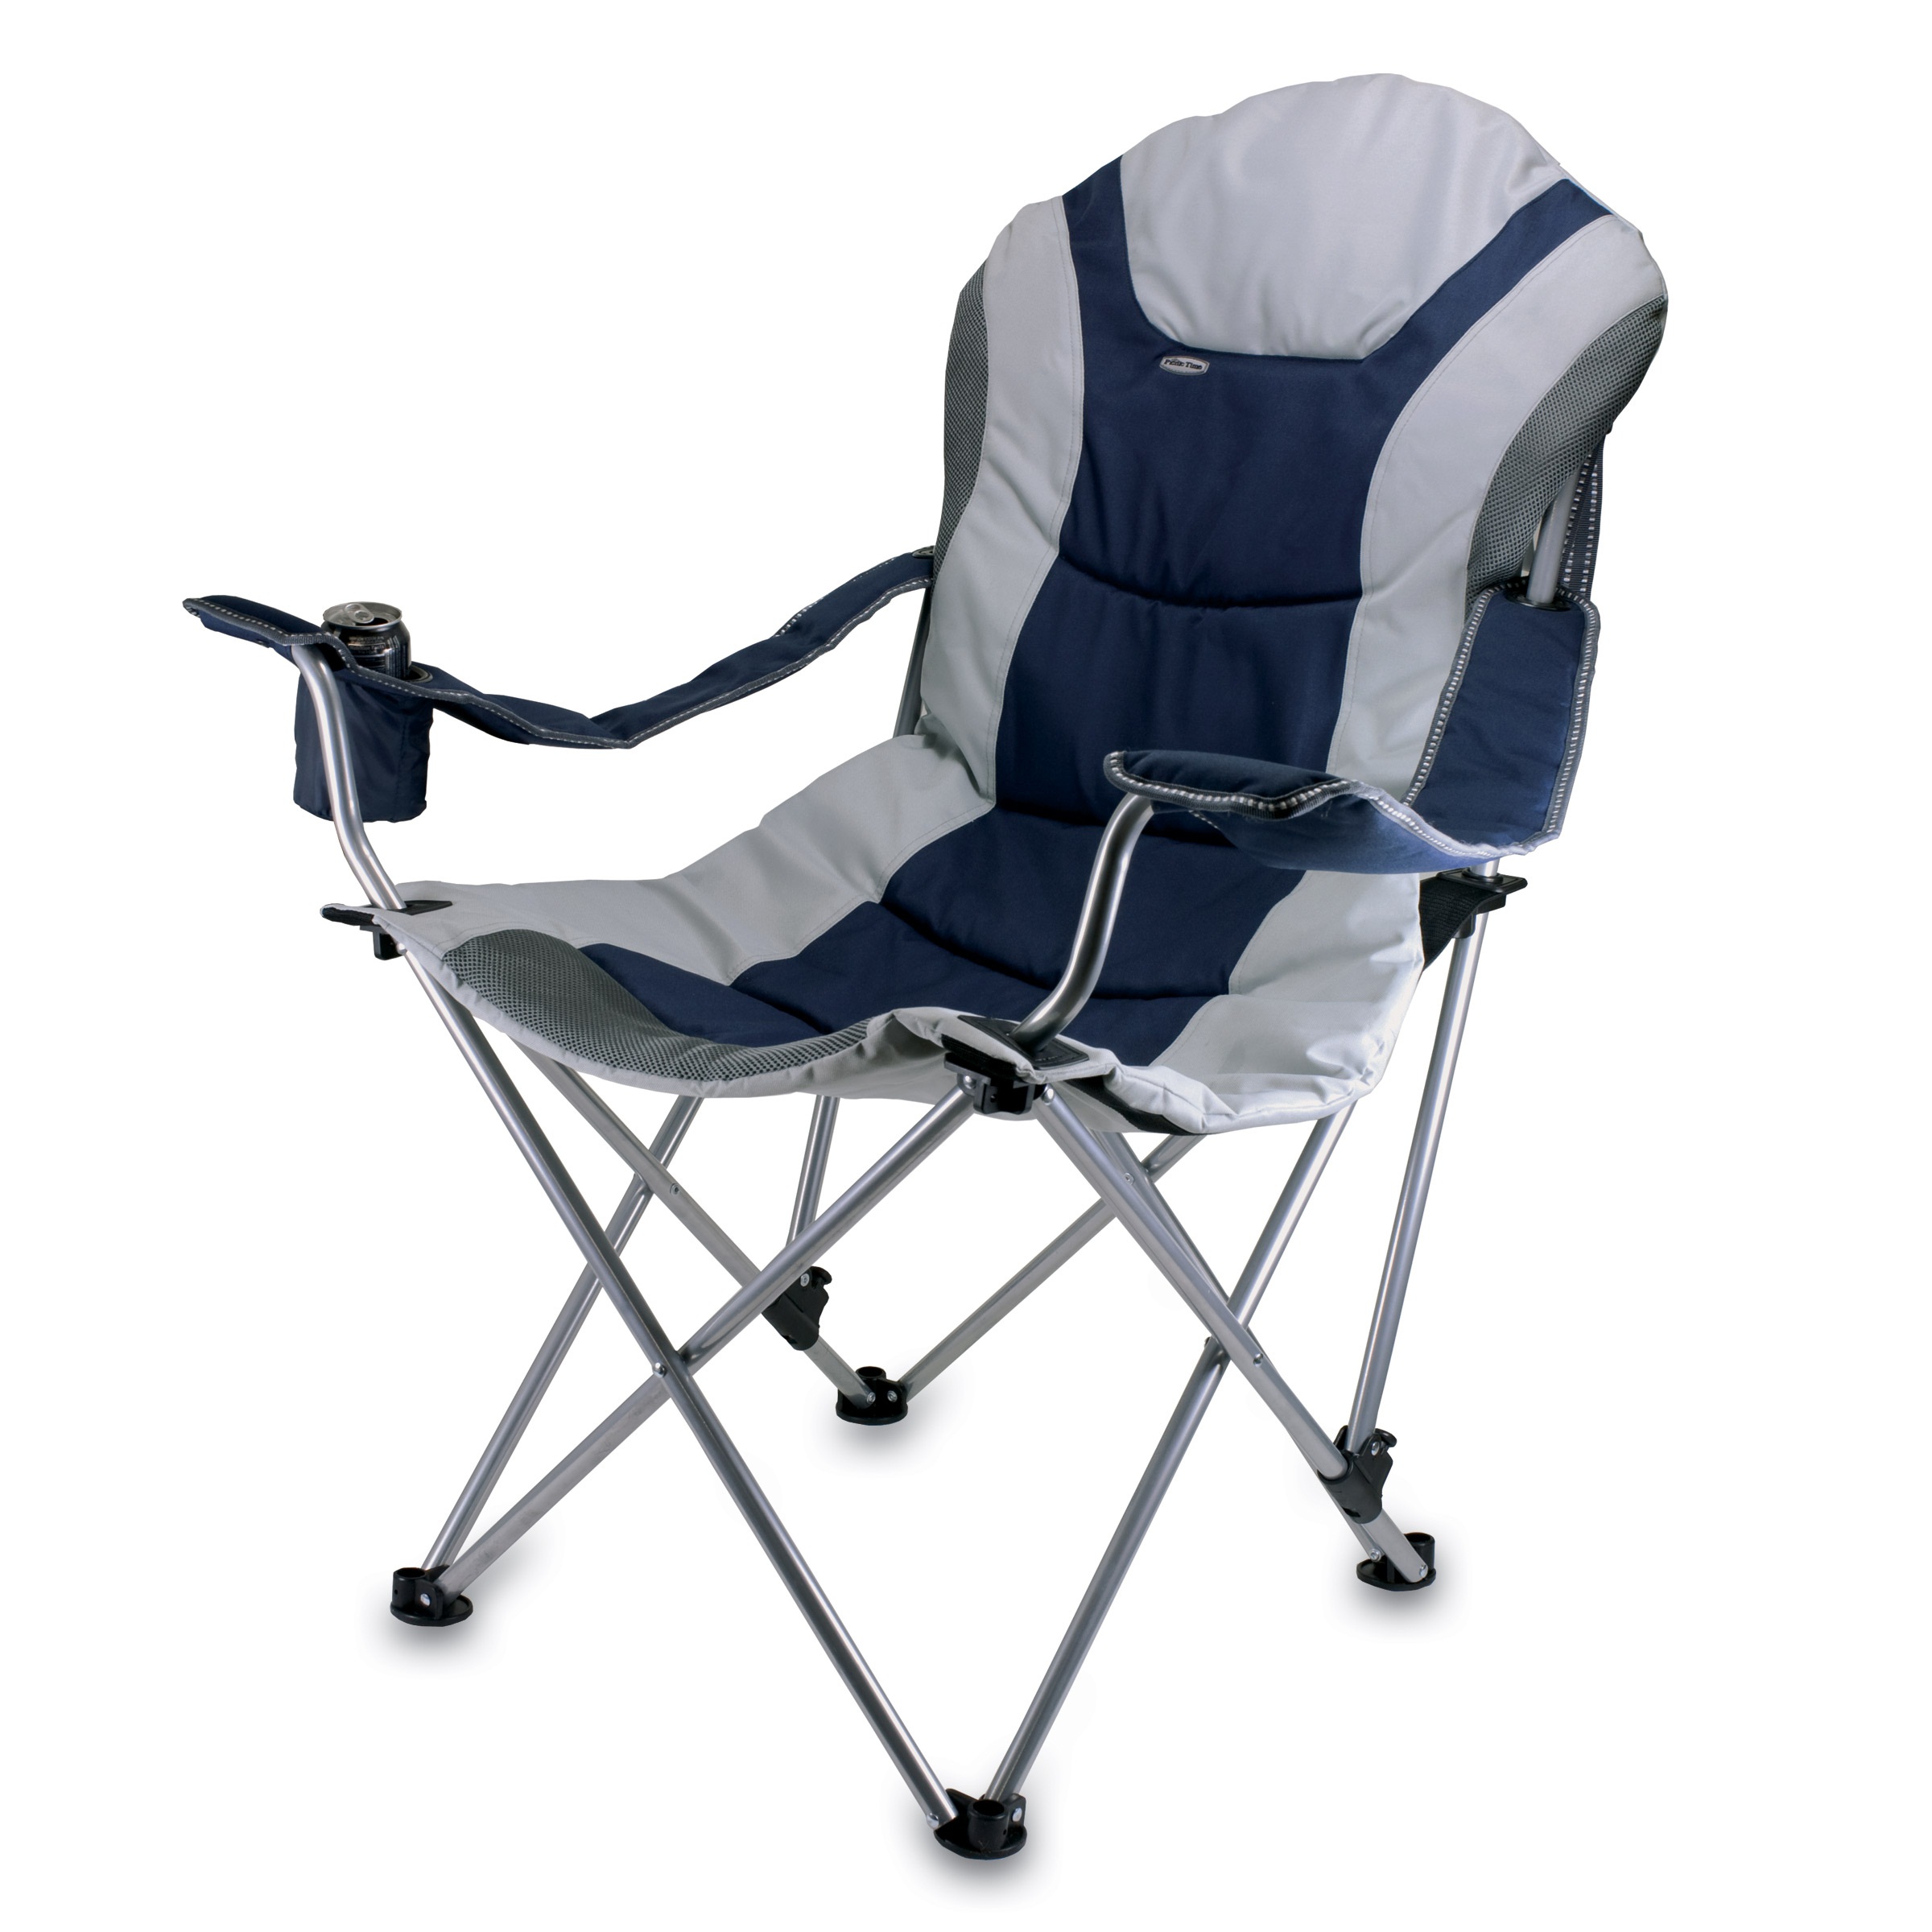 Reclining picnic chair, navy and gray CZSYMBQ